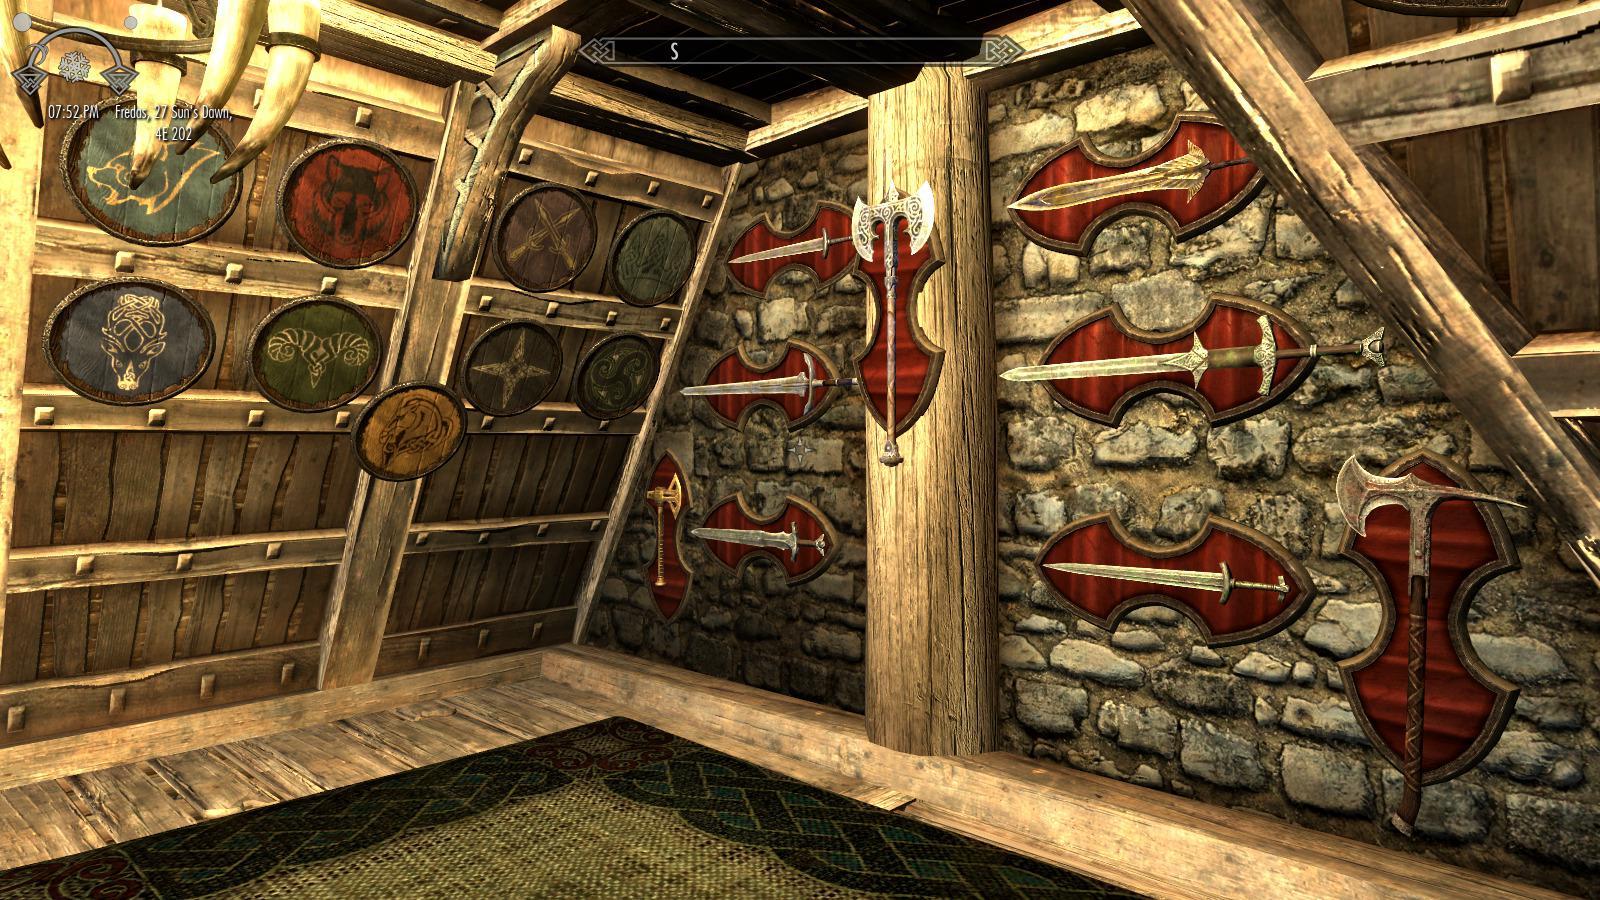 All Thane Weapons in Skyrim